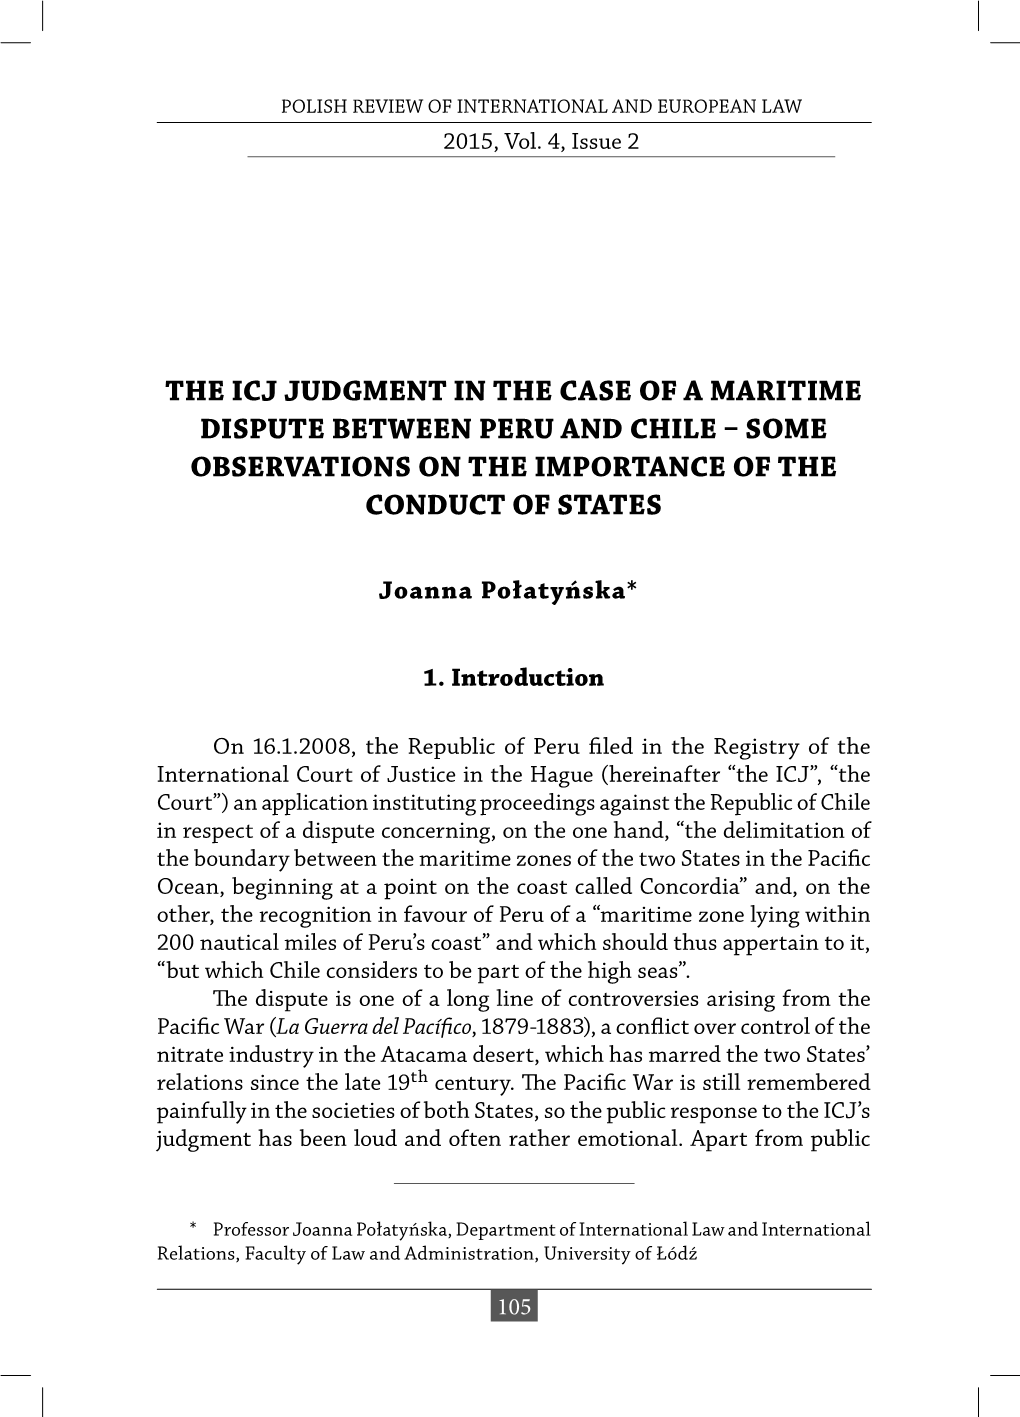 The Icj Judgment in the Case of a Maritime Dispute Between Peru and Chile – Some Observations on the Importance of the Conduct of States